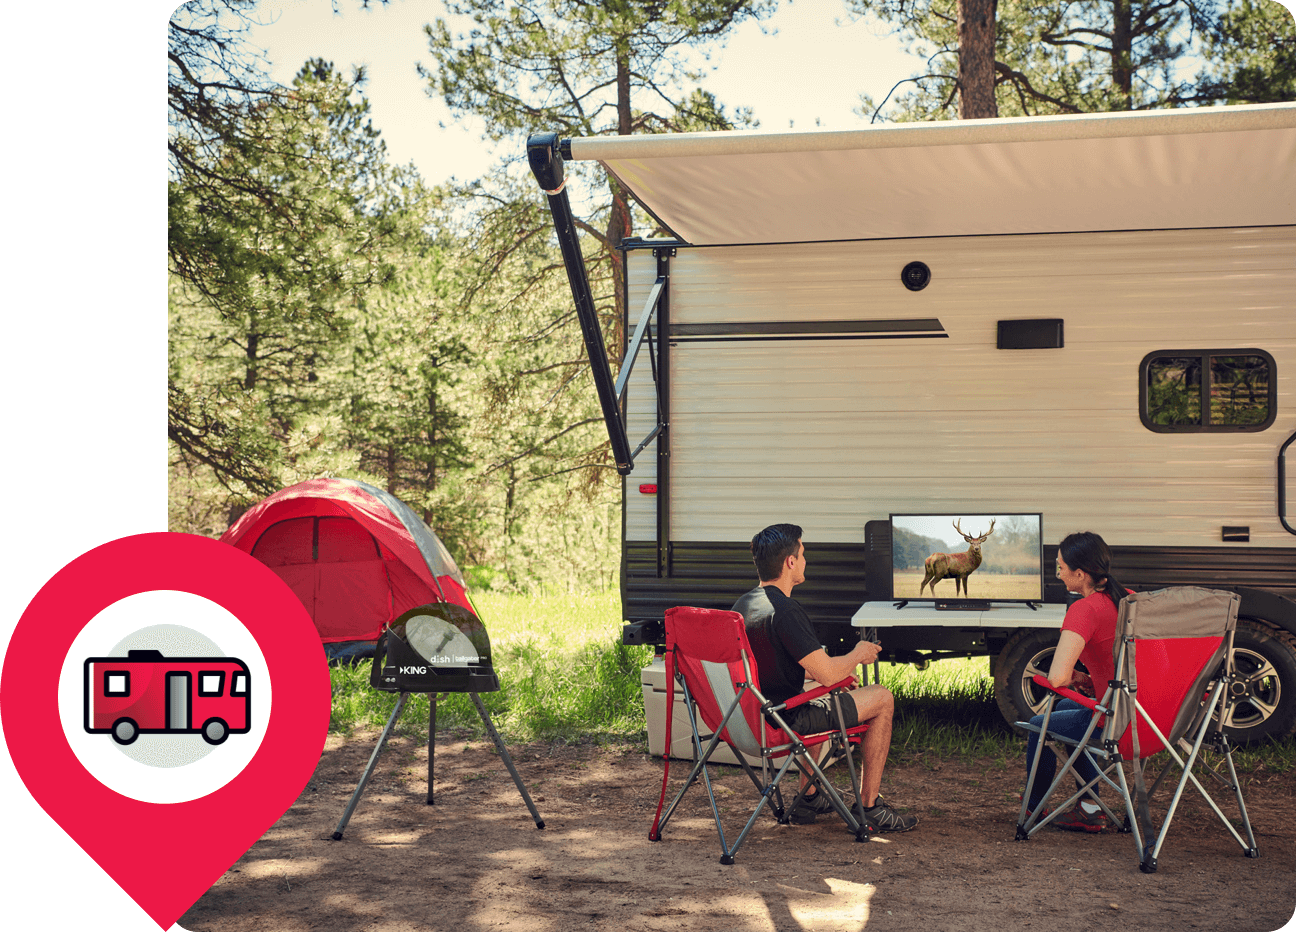 Couple sitting on camping chairs next to an RV with a television showing a deer.